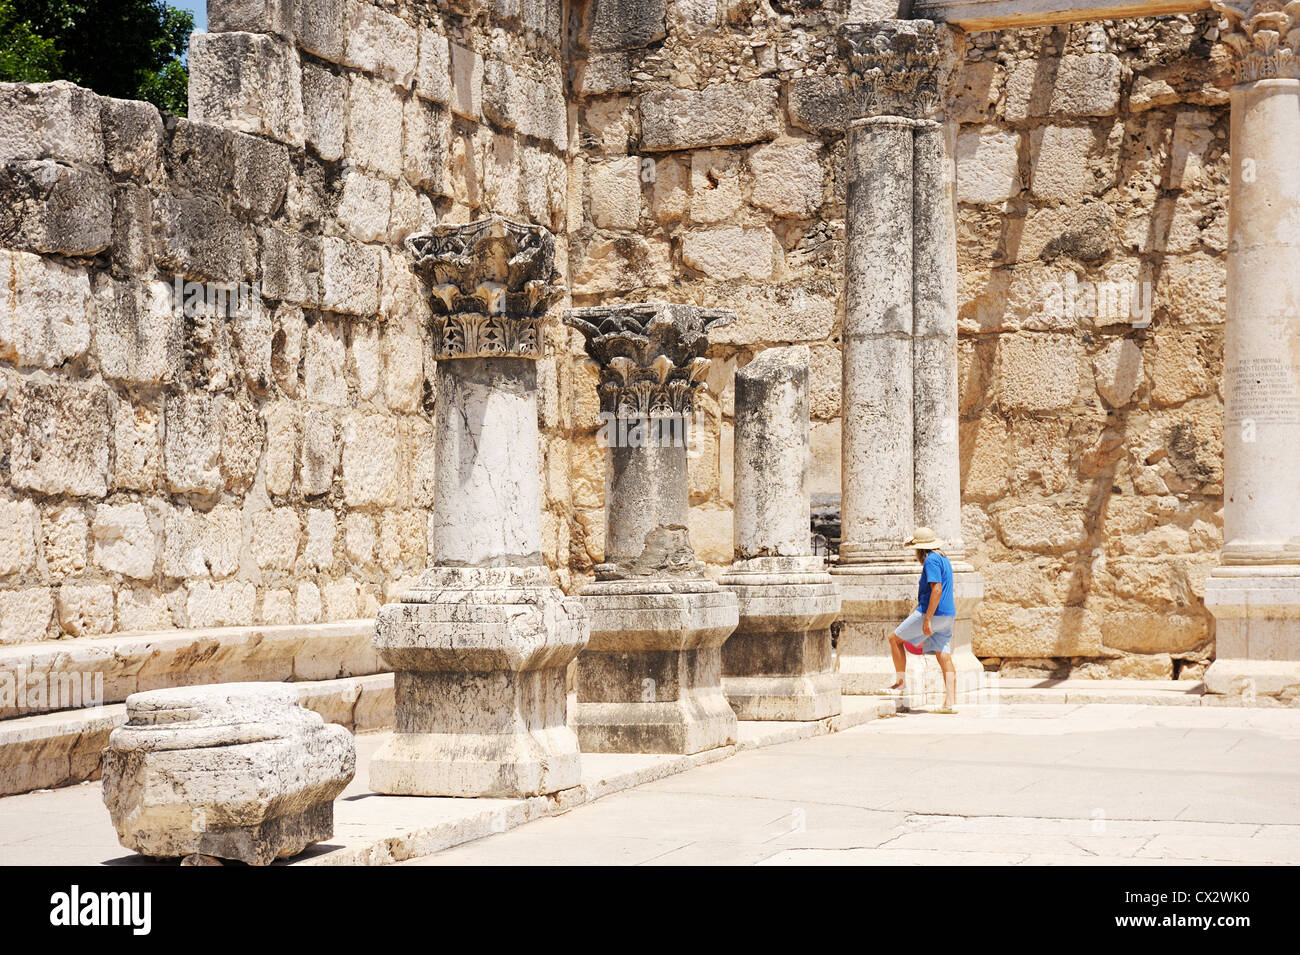 Ruins of ancient Roman temple in the town of Capernaum (Galilee, Israel) Stock Photo